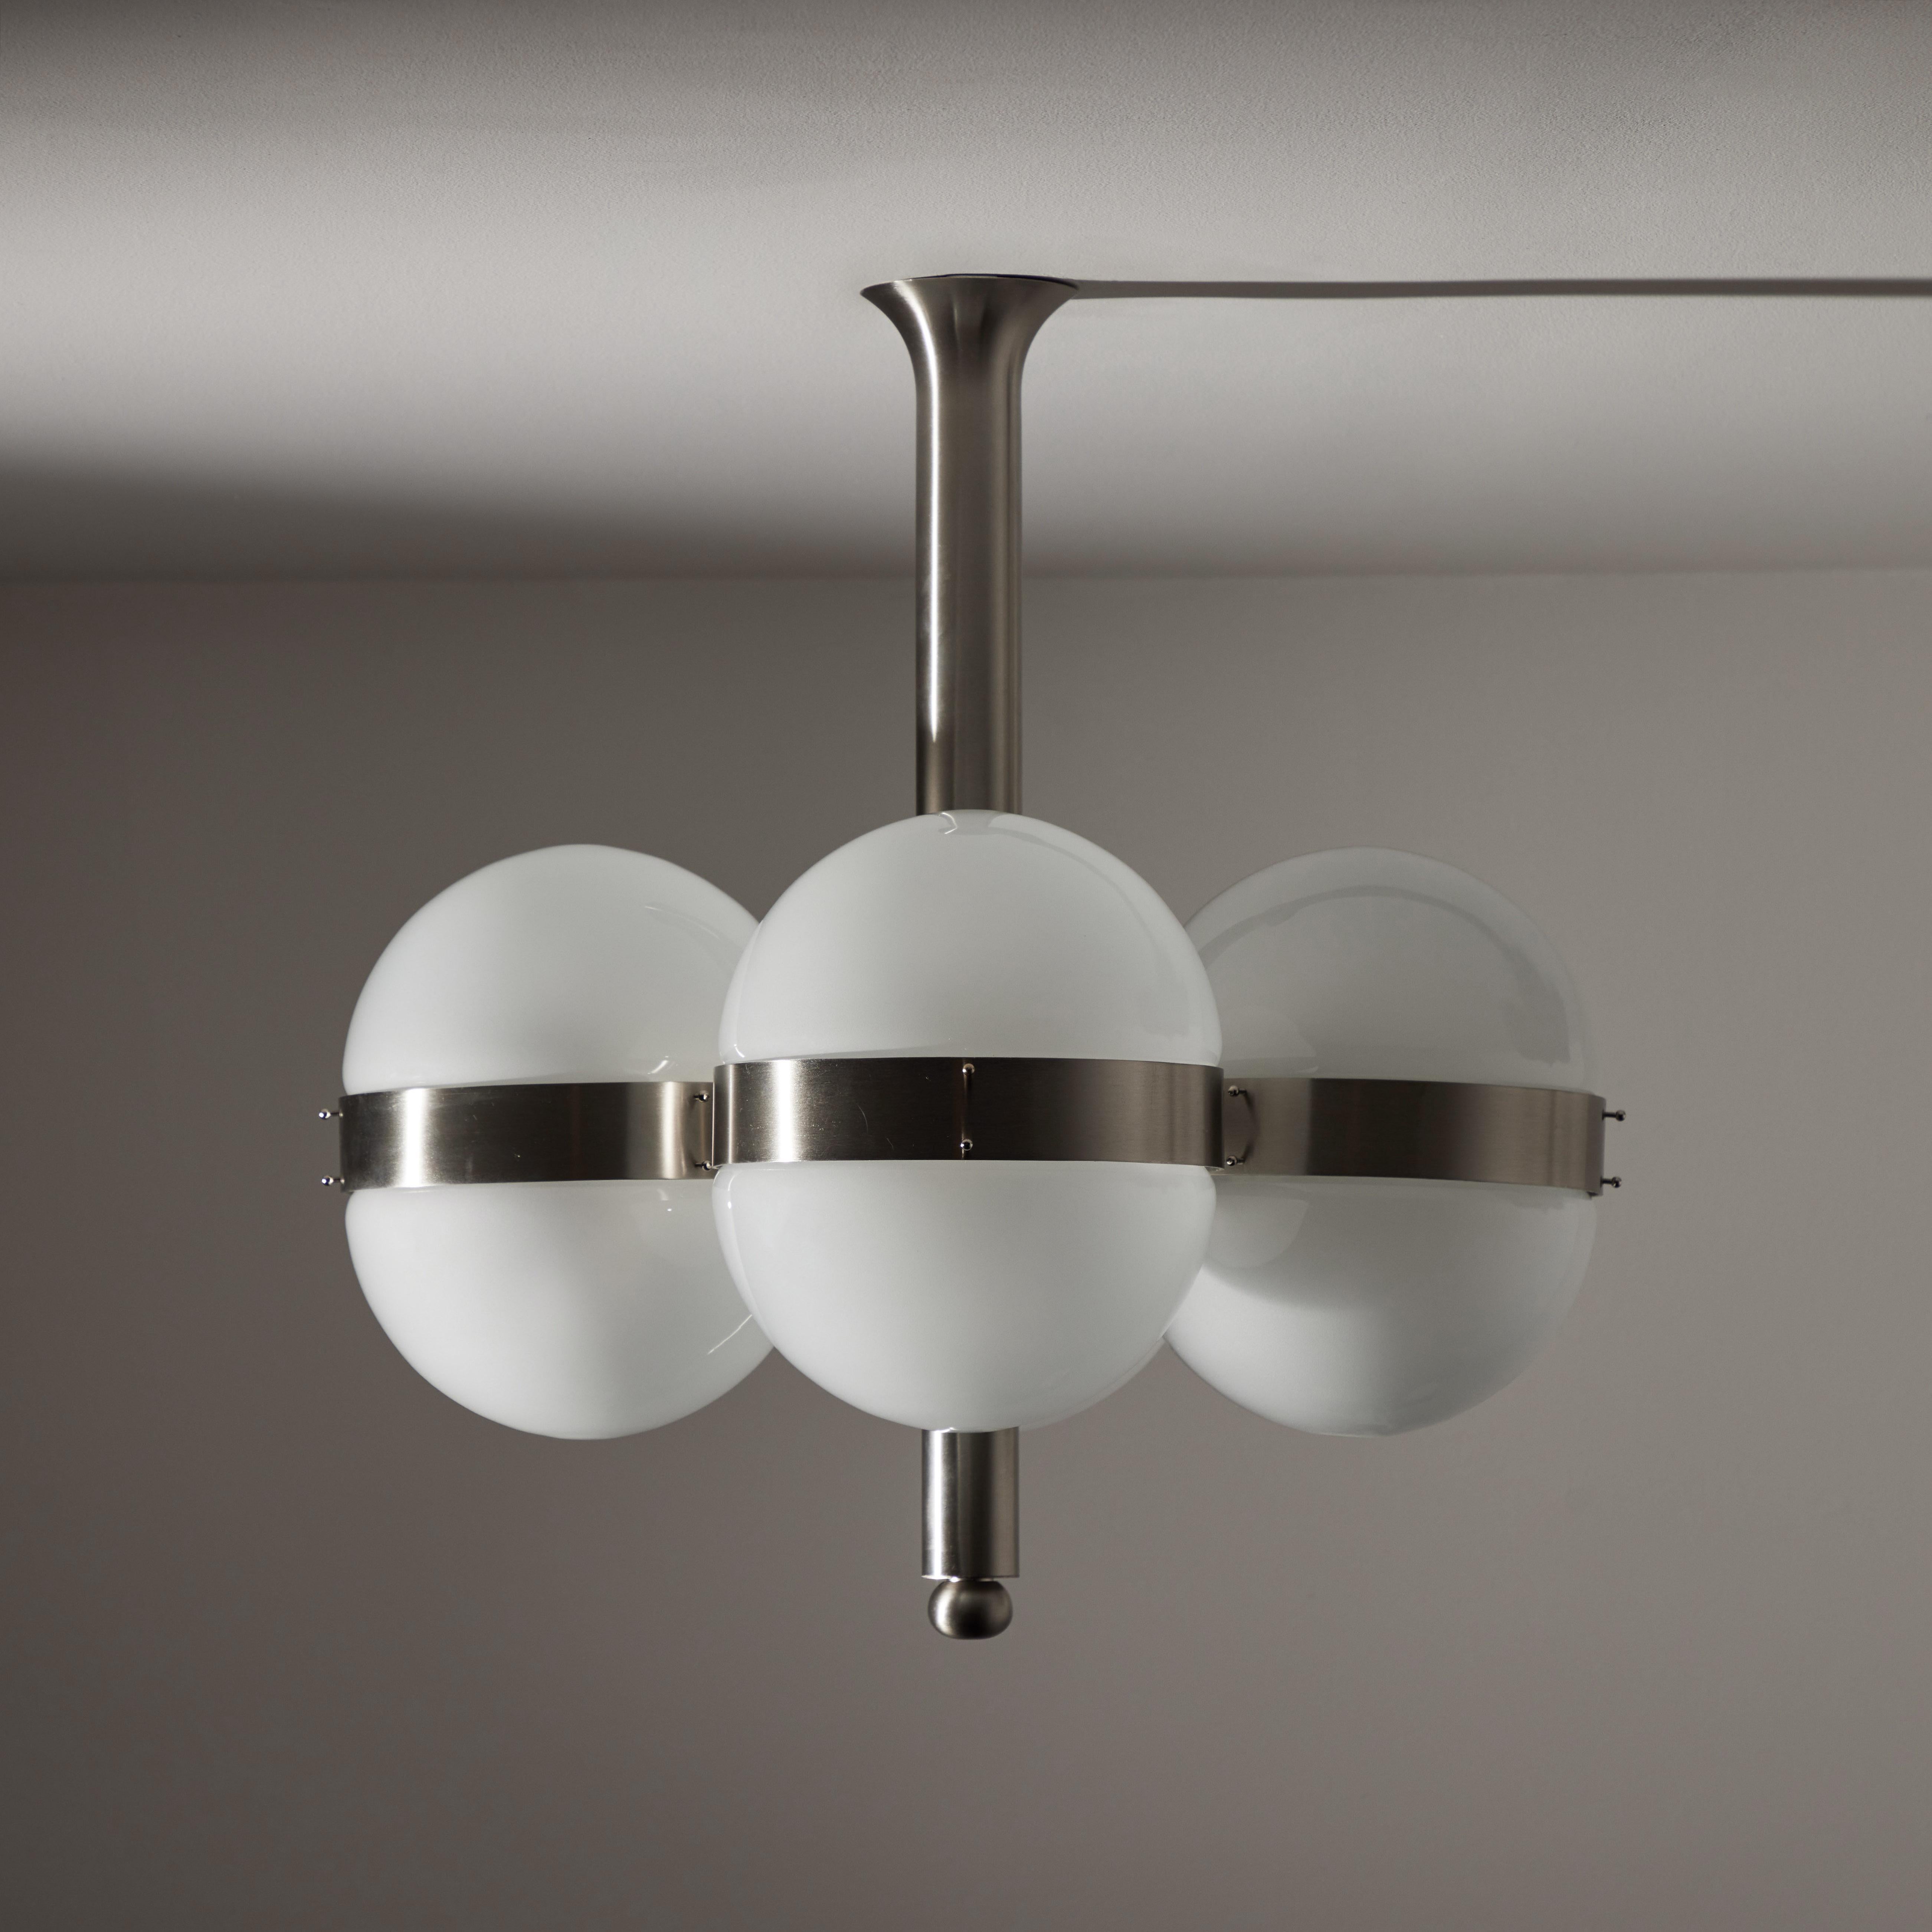 “Tetraclio” chandelier by Sergio Mazza for Artemide. Designed and manufactured in Italy circa the 1960s. Satin nickel parts hold etched glass diffusers. Wired for the US. Holds eight E27 medium base sockets. Recommended 30w max bulbs. Bulbs provided